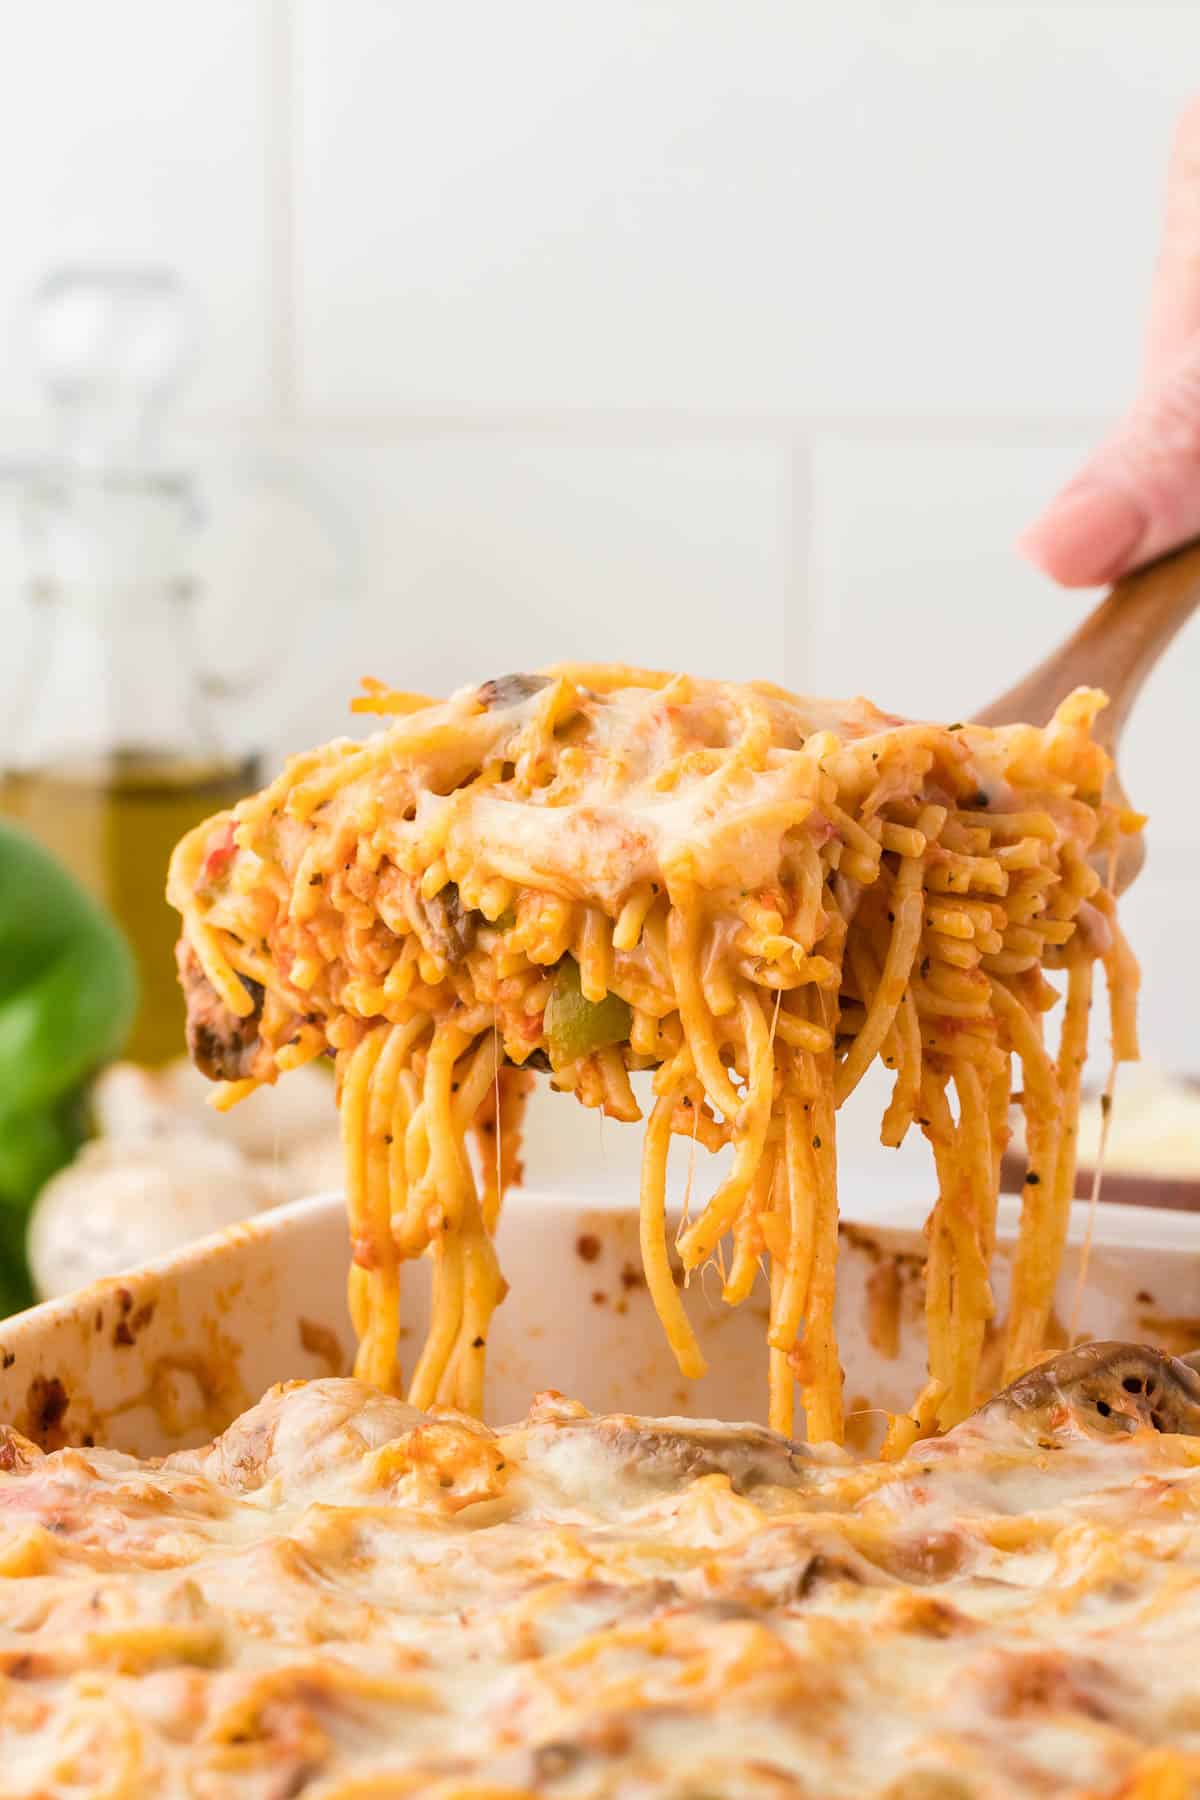 taking a serving of spaghetti bake from the dish